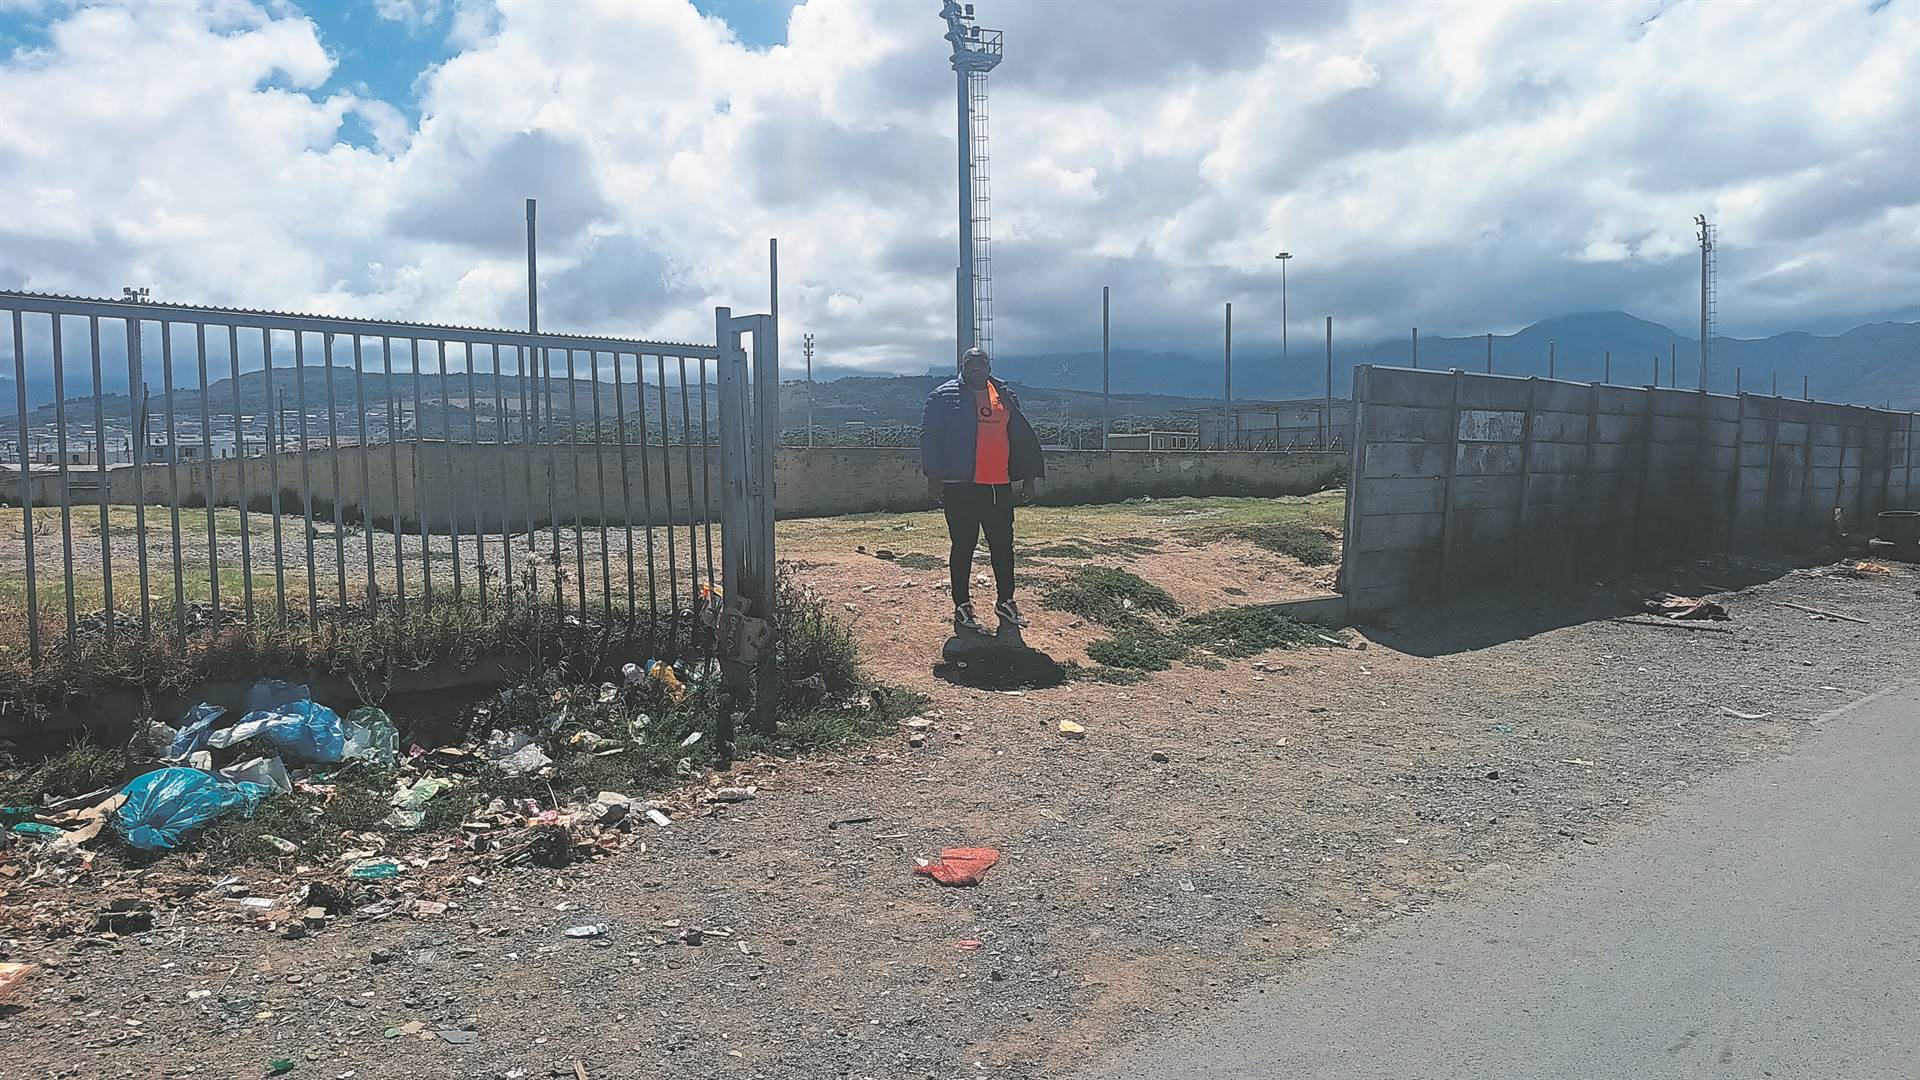 Ward 86 councillor Xolani Diniso stands at one of the open spaces at the stadium. PHOTO: UNATHI OBOSE